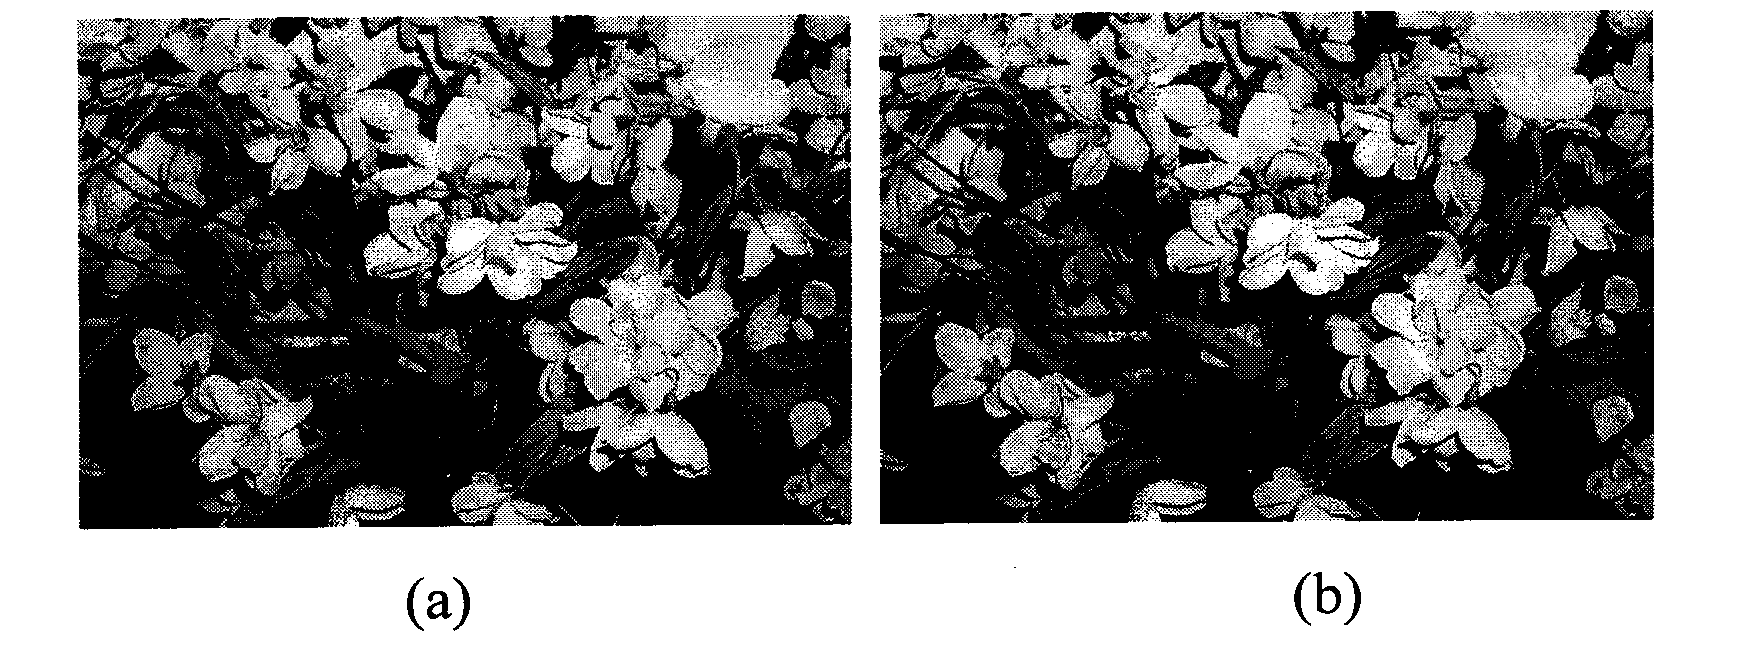 Method for testing compression history of BMP image based on loss amount of image information